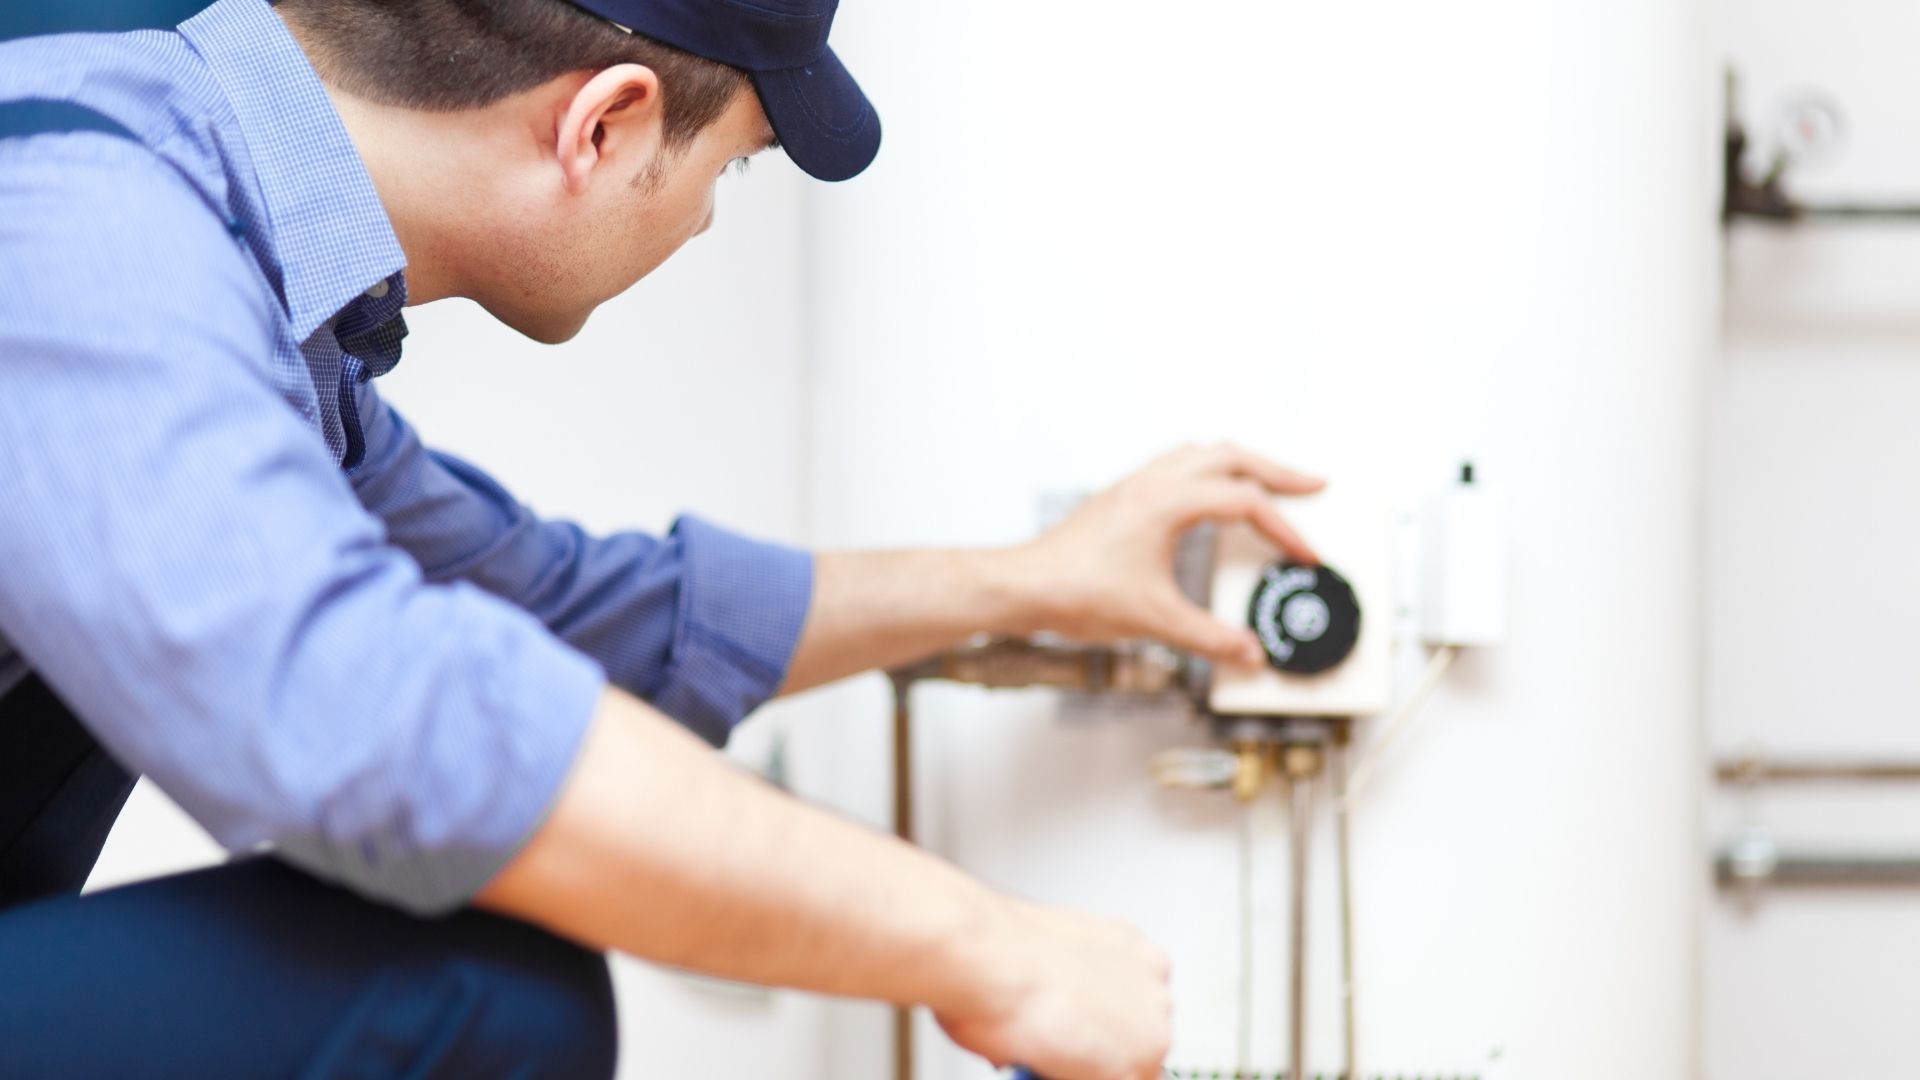 Electricians Sometimes Repair Water Heaters: Understanding the Overlap in Skills and Services